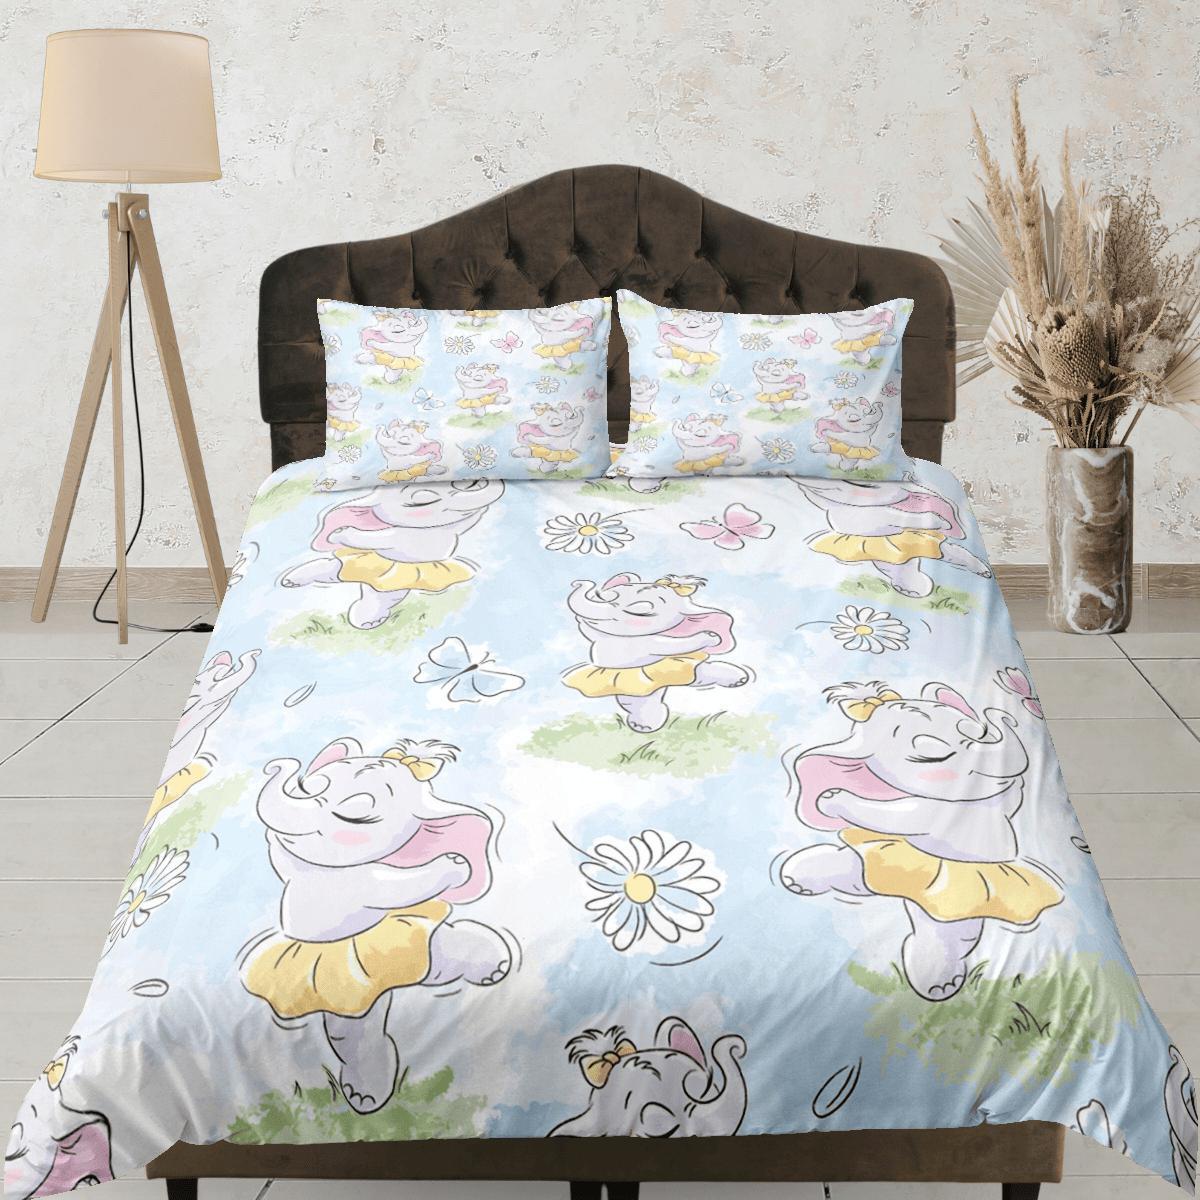 daintyduvet Dancing Cute Elephant Duvet Cover Set Colorful Bedspread, Kids Full Bedding Set with Pillowcase, Comforter Cover Twin